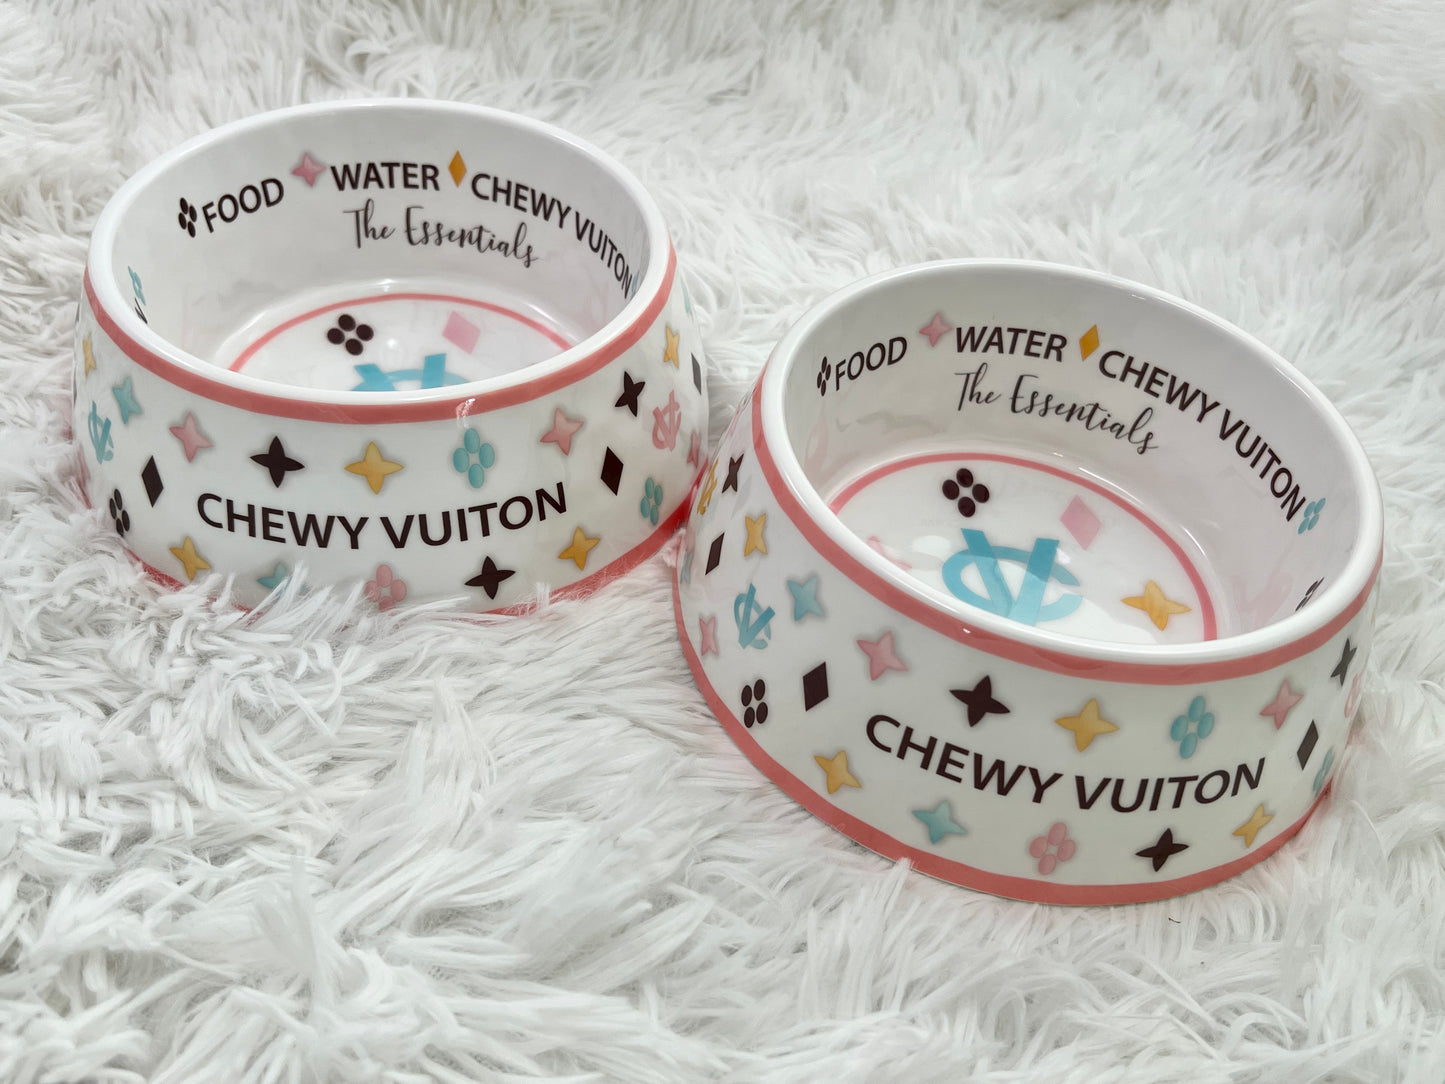 Introducing chic and stylish dog bowls. Our brand new Bowl is how you create a beautiful dining experience for someone who eats on the floor.   *Please note, bowls are sold individually and not as a set*  White Chewy Vuiton Bowl    Checker pattern Chewy Vuiton Bowl  Starbarks Bowl  Chip-resistant Melamine Construction BPA-Free One Size Only (23 oz./2.5 cups) Non-skid bottom Side cutout for easy pickup